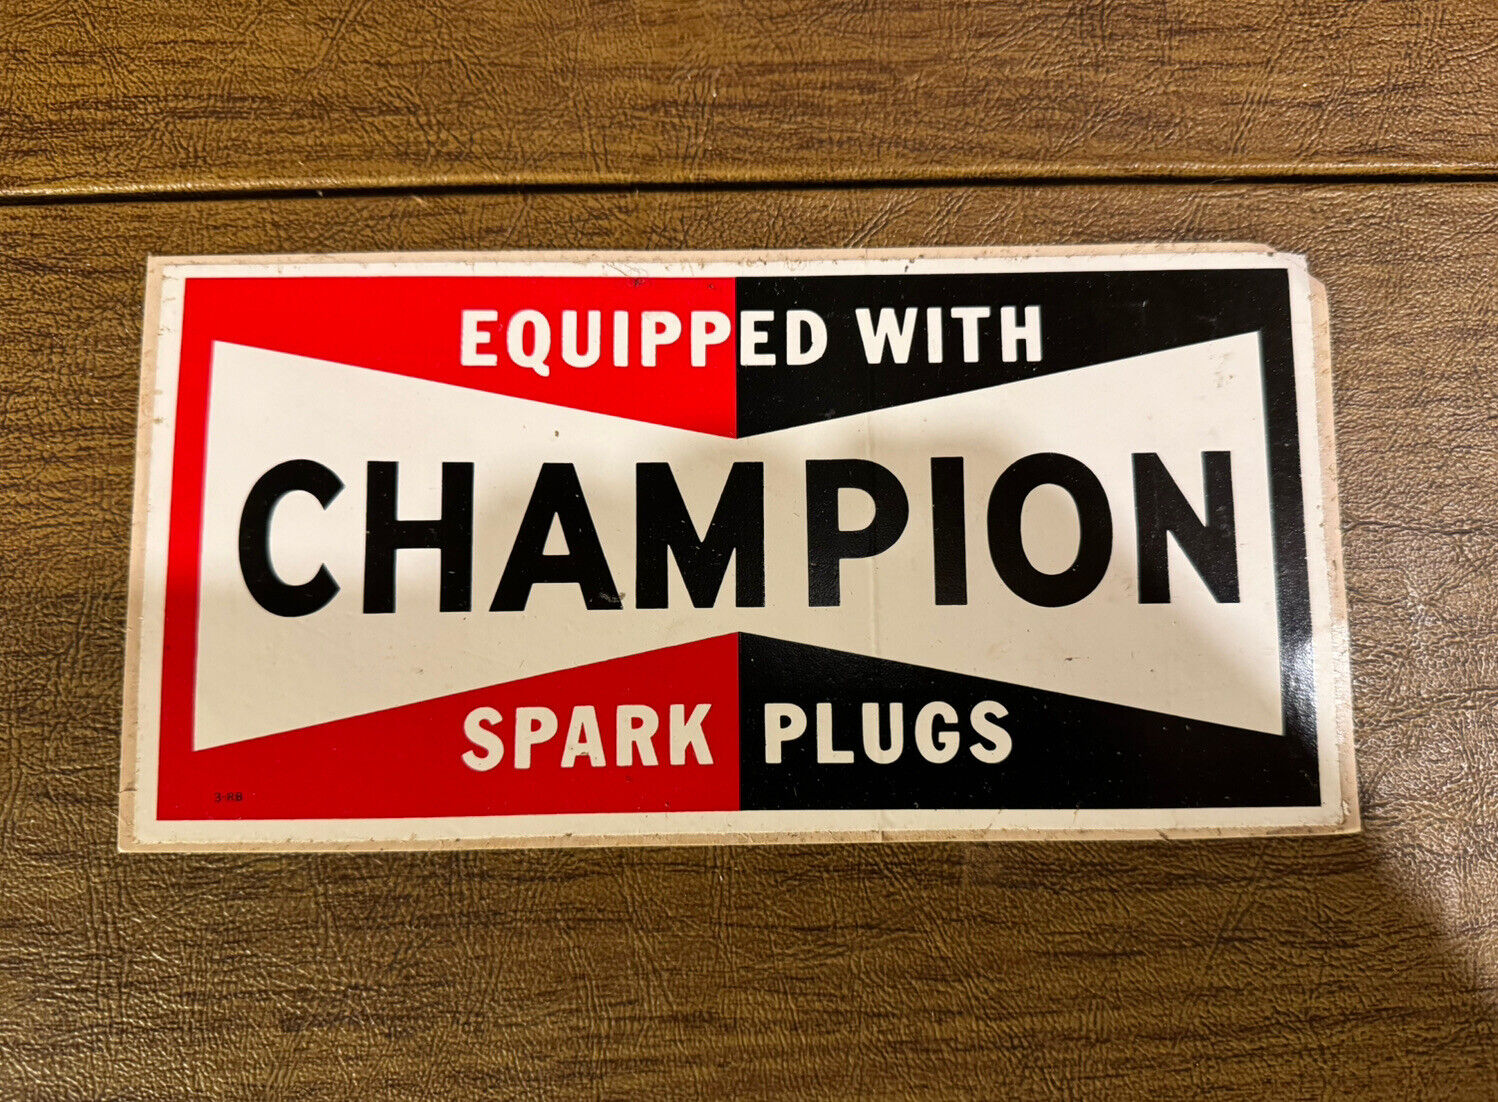 Vintage Large Equipped With Champion Spark Plugs 4”x 8” Size Sticker.